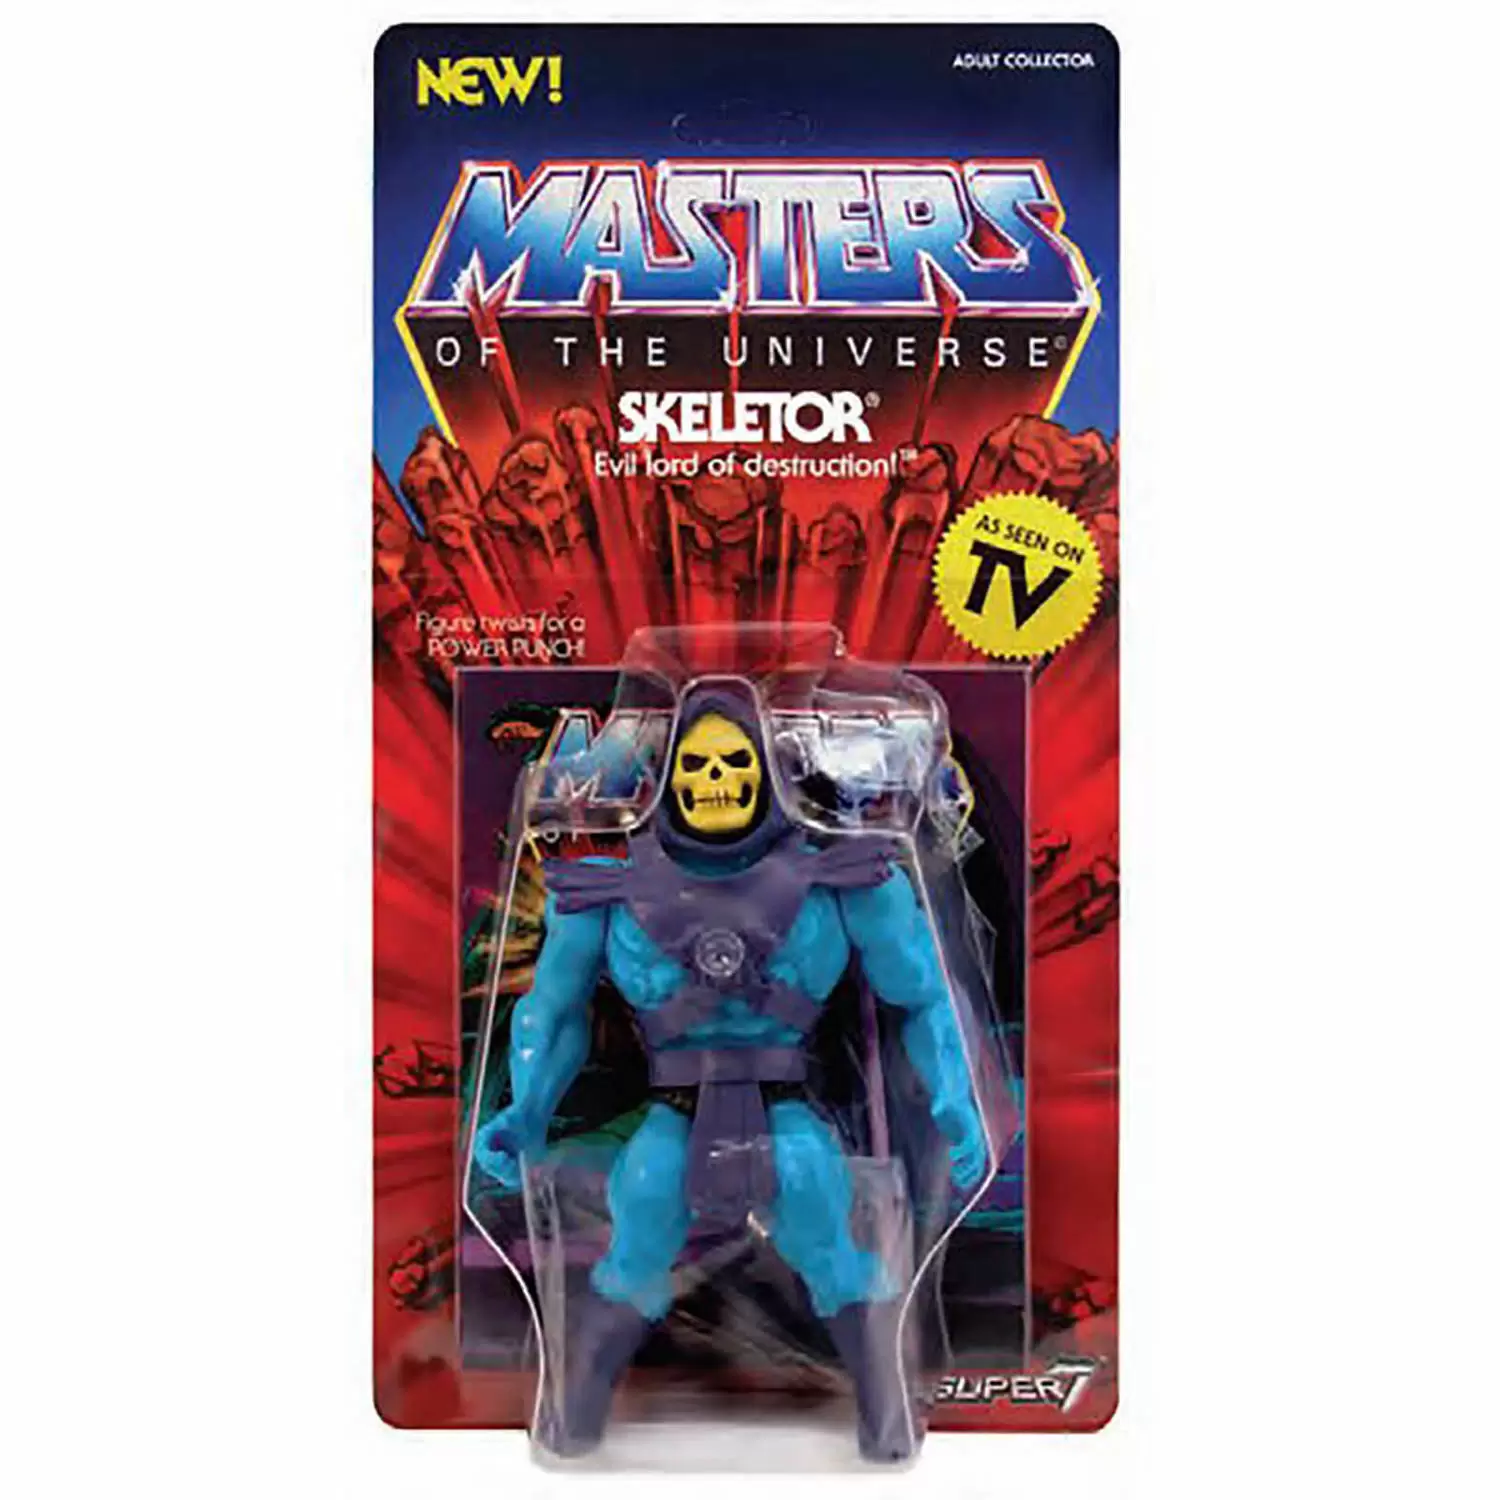 Super7 - Masters of the Universe - Power Punch - Skeletor